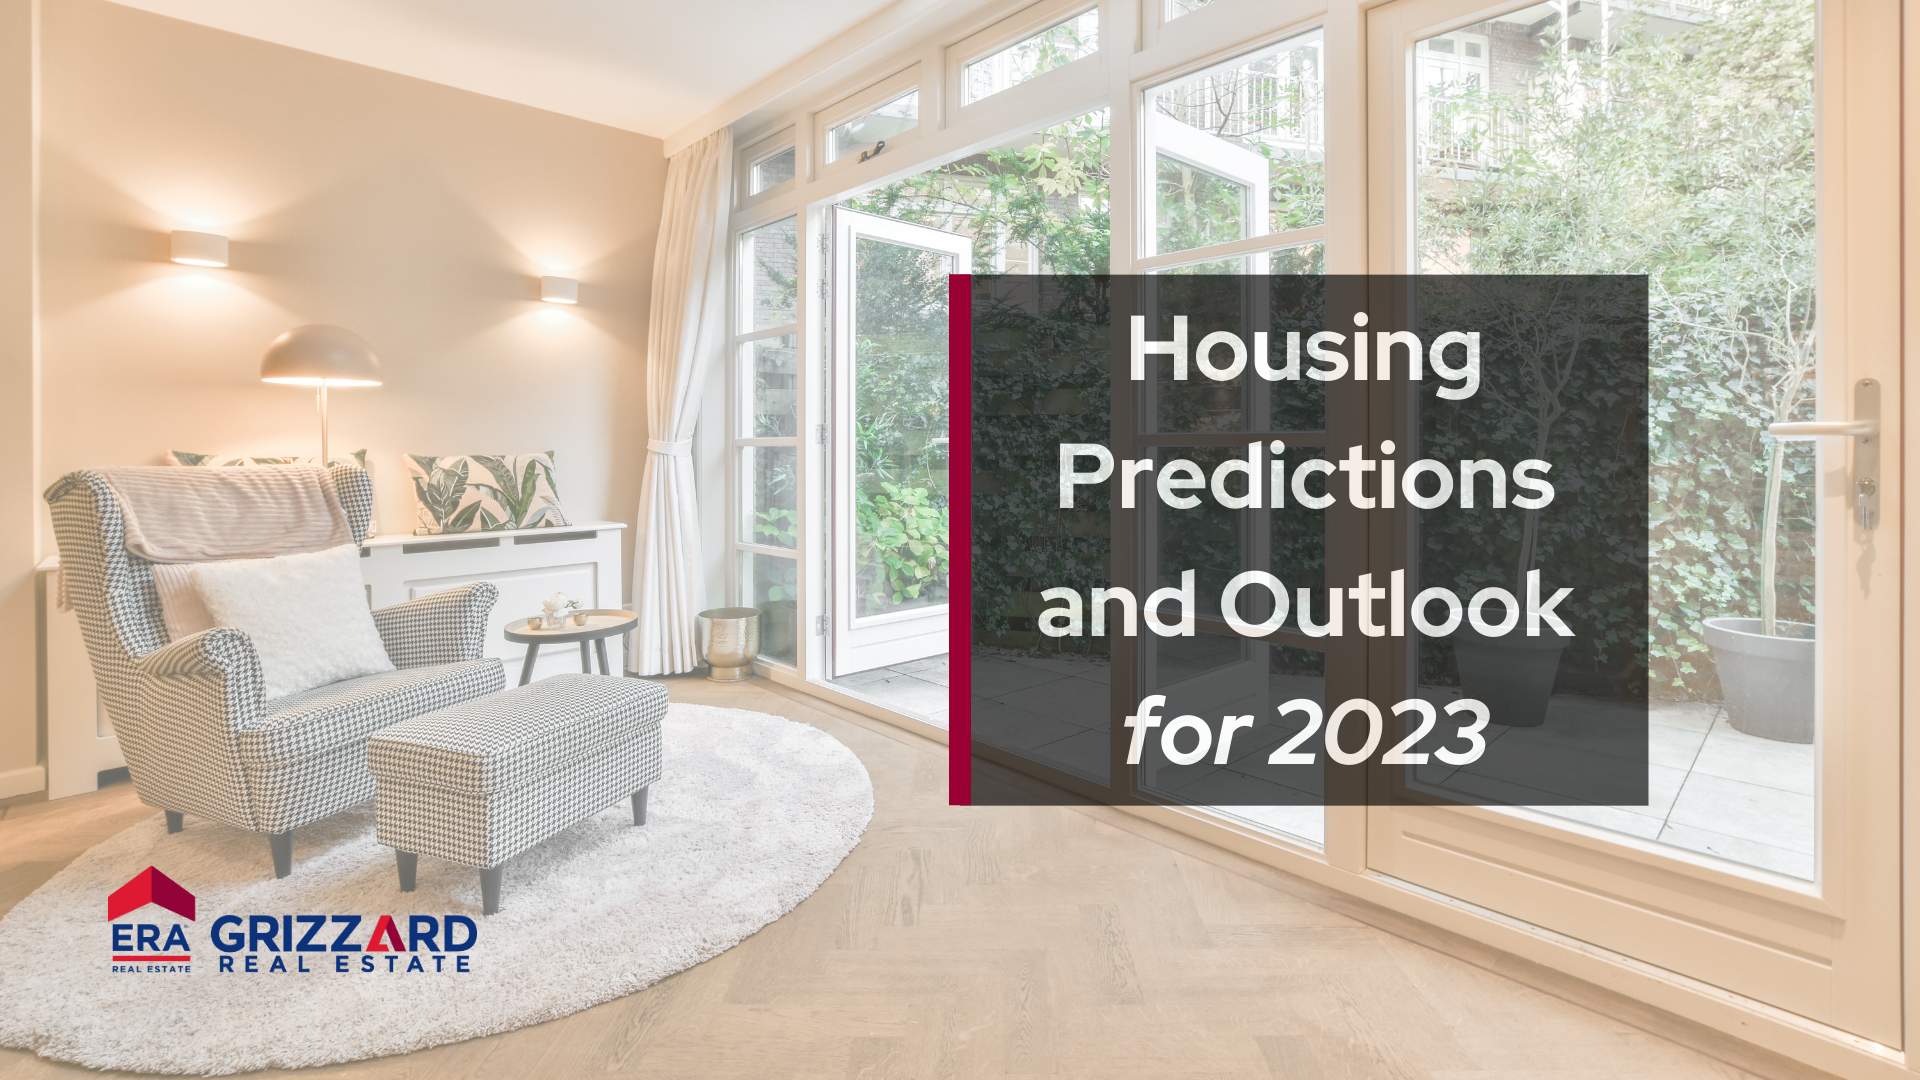 Housing Predictions and Outlook for 2023